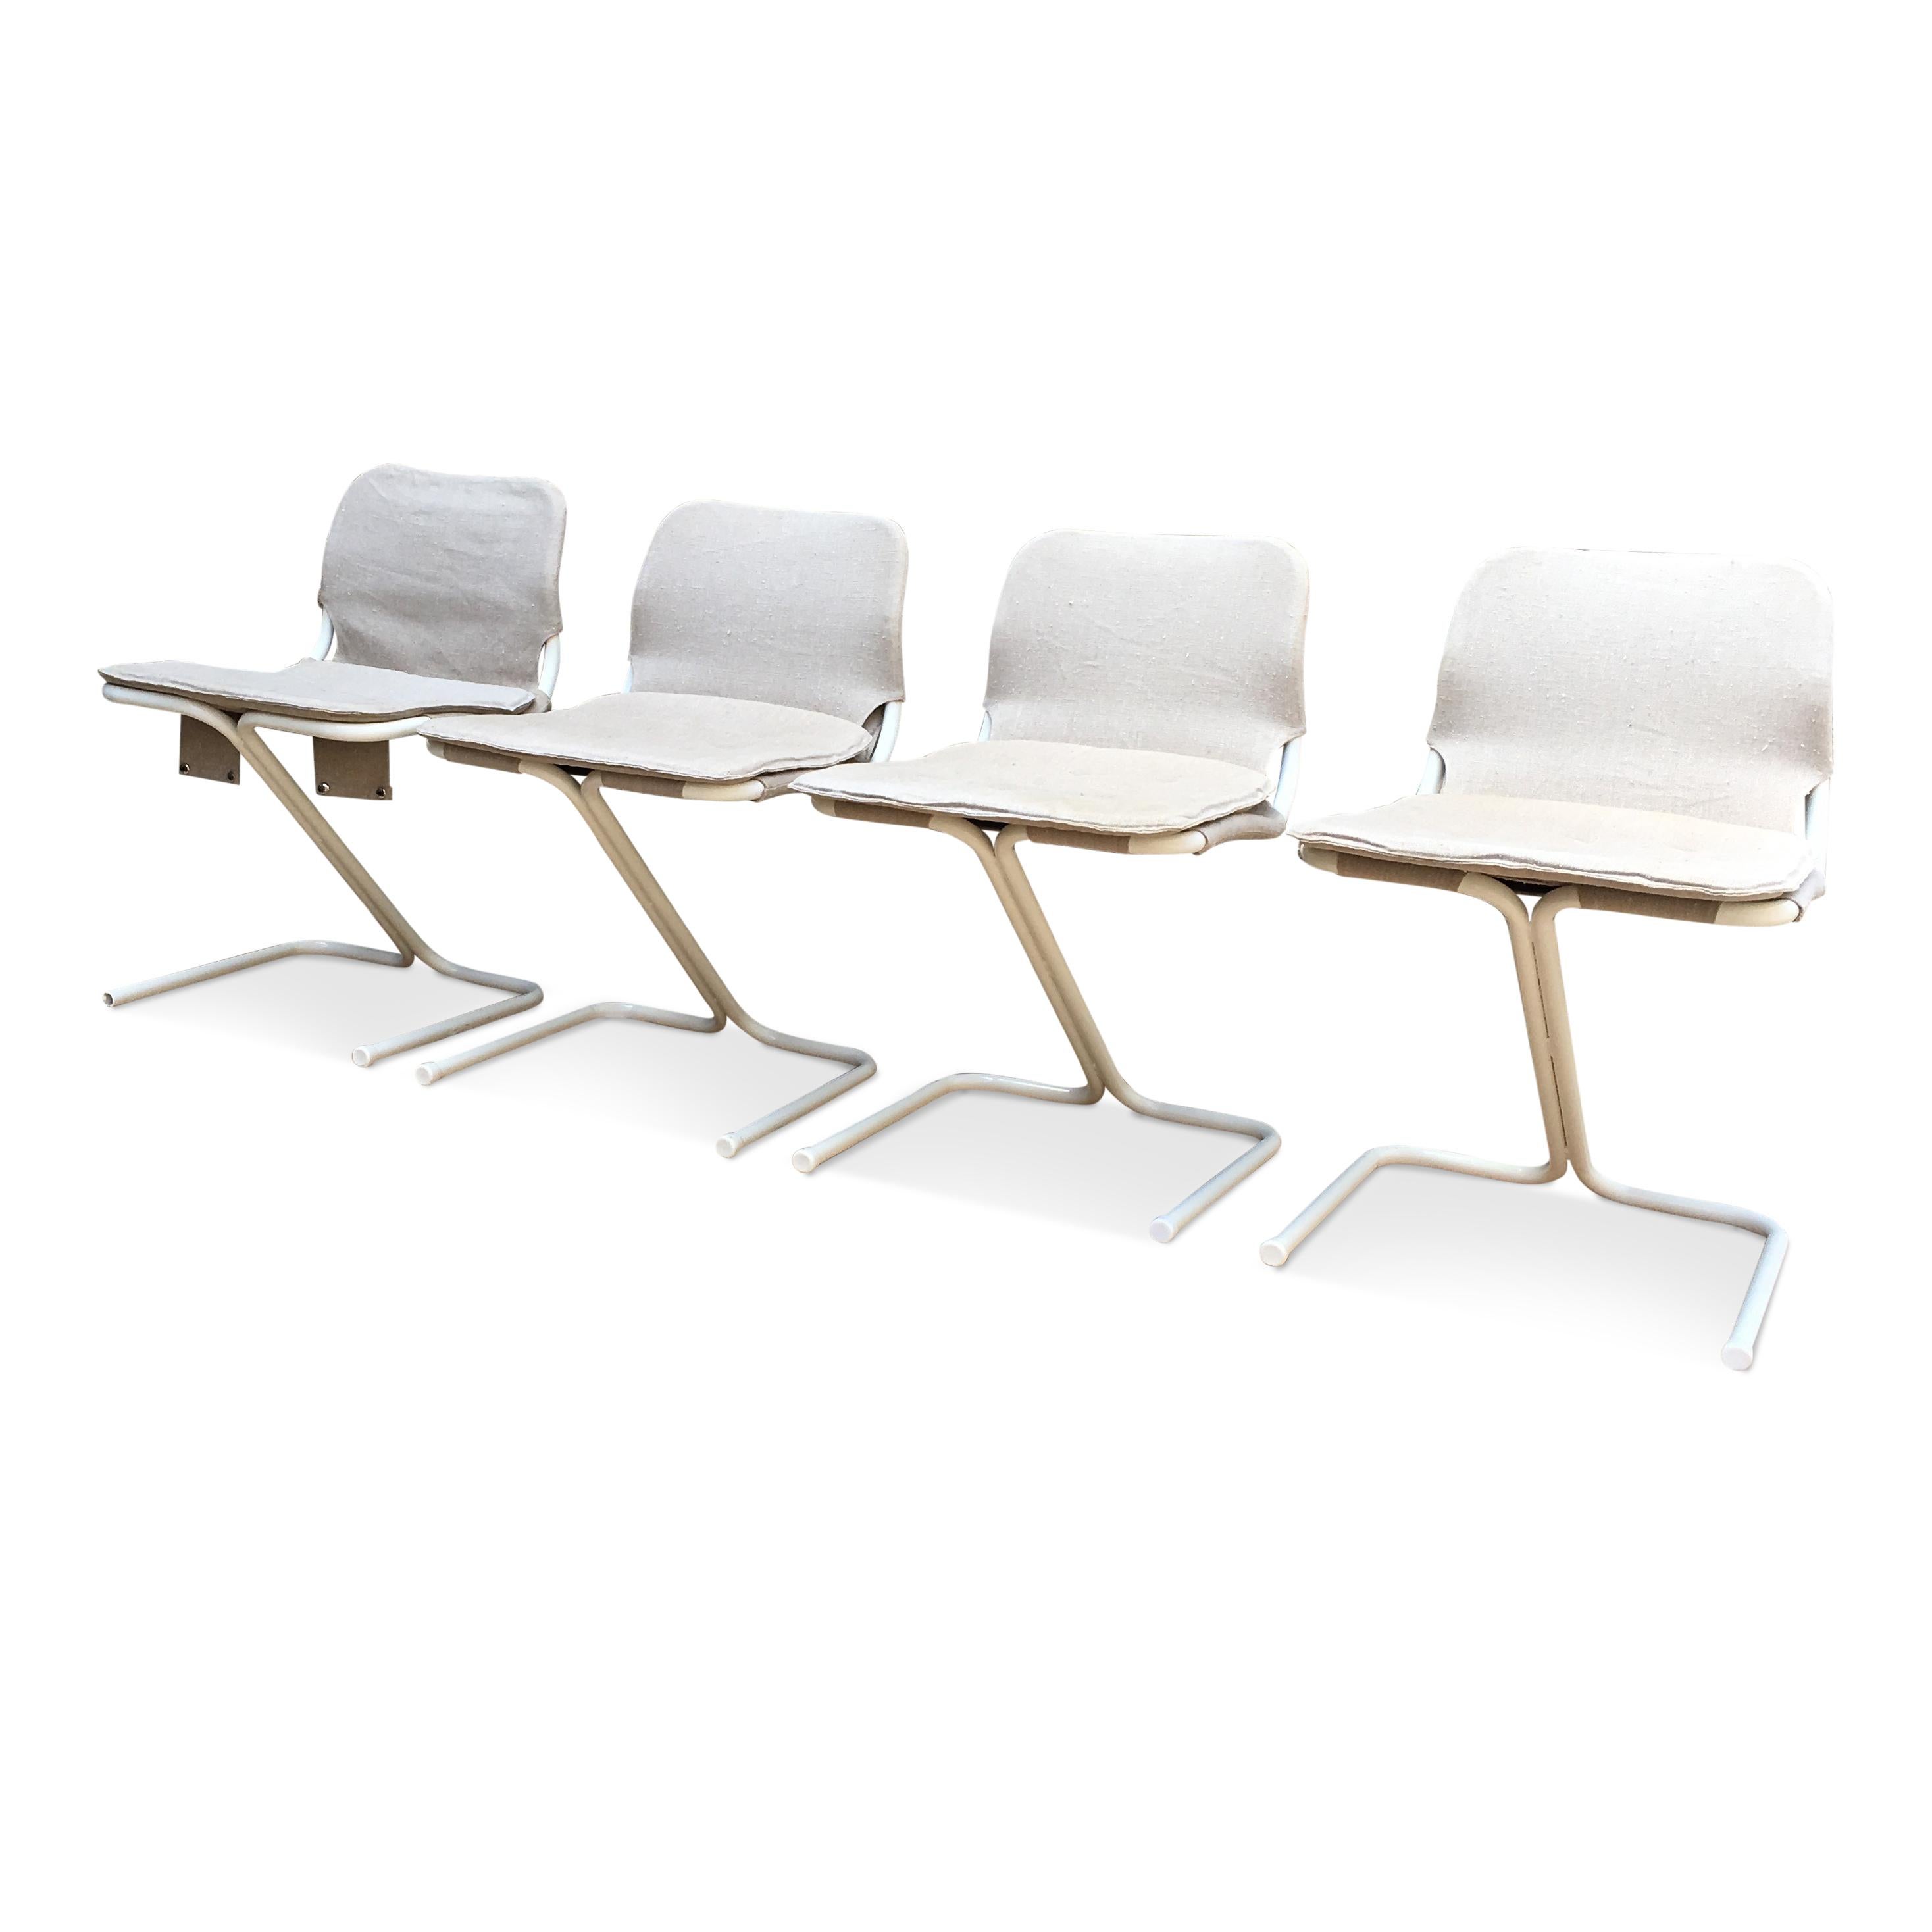 Scandinavian Modern 4 Midcentury Swedish White Metal Stackable Chairs from DUX, 1968 For Sale